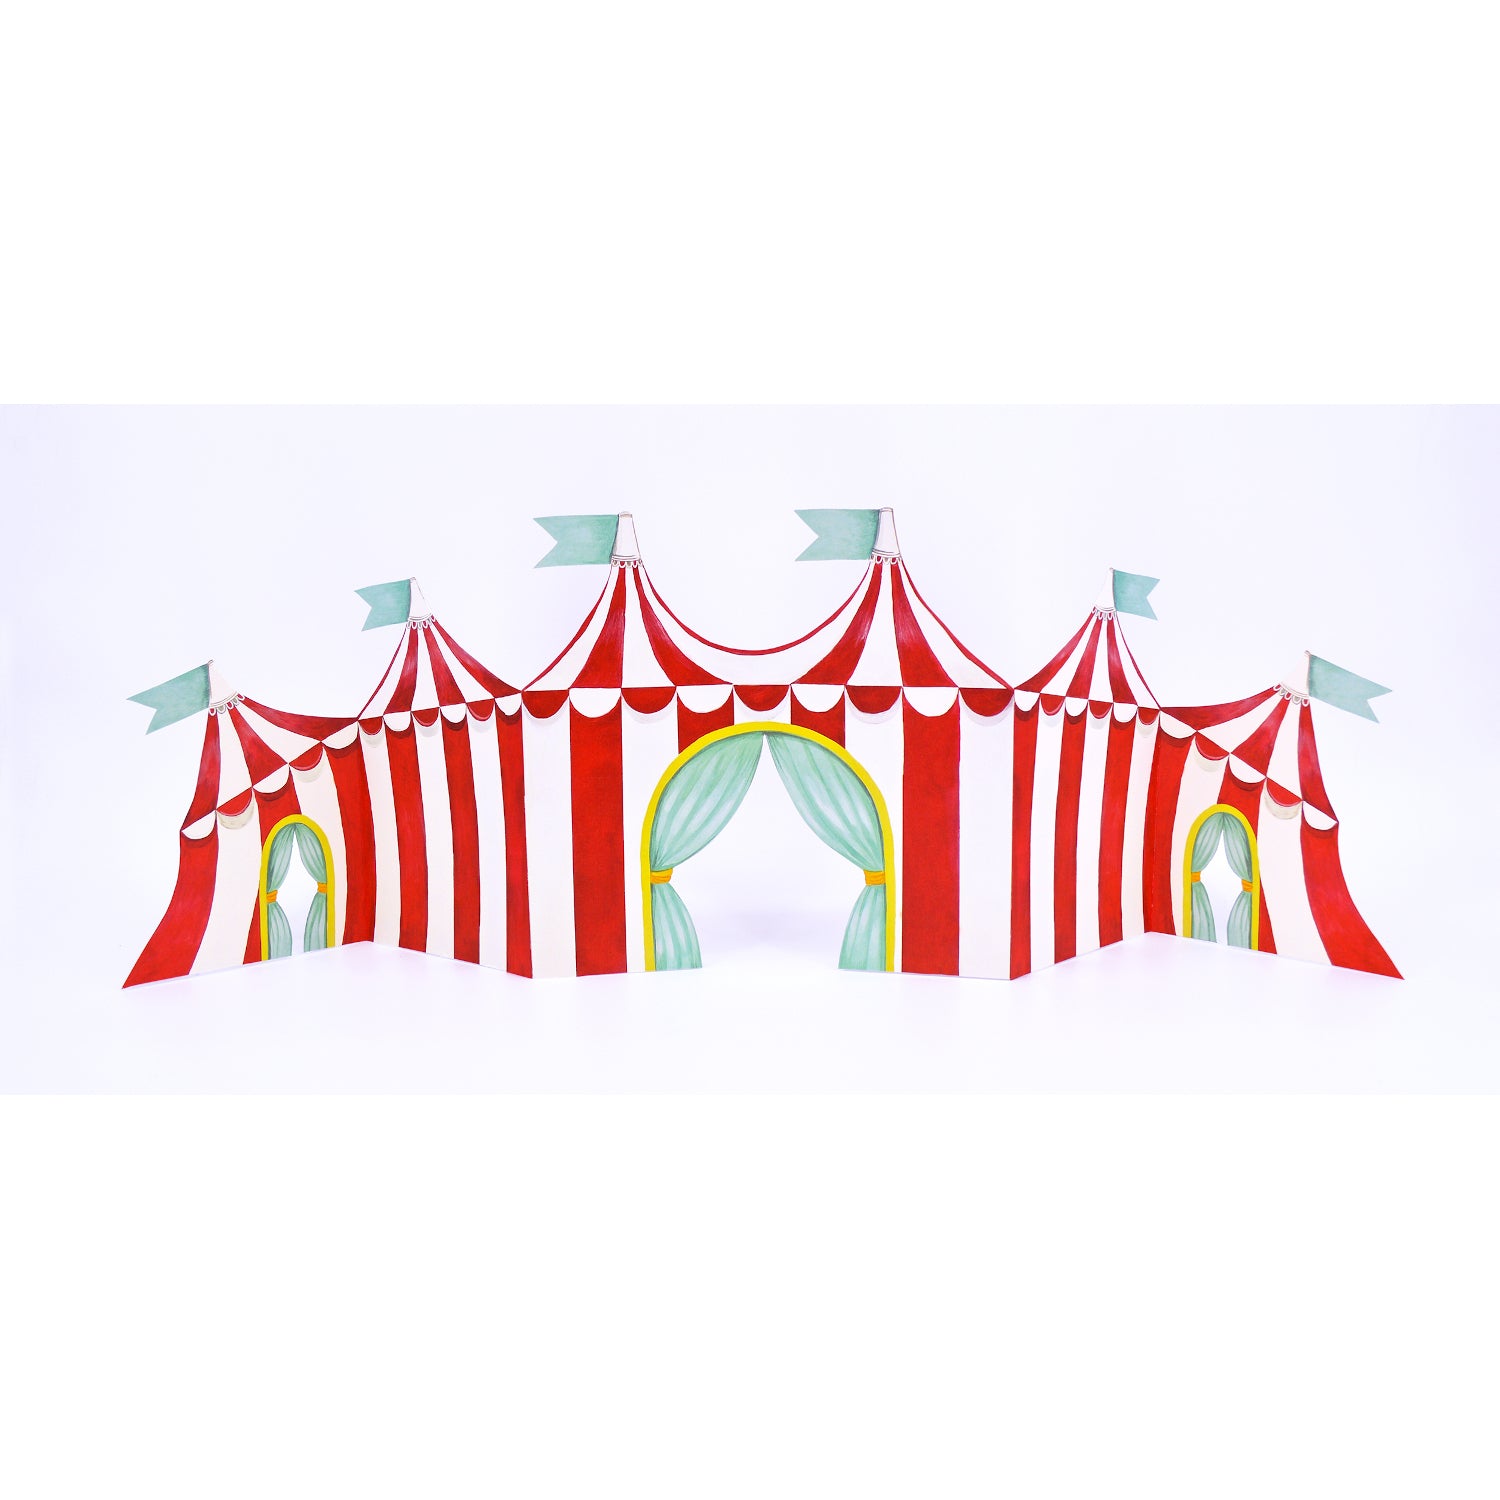 A red and white striped Hester &amp; Cook Circus Tent Centerscape.